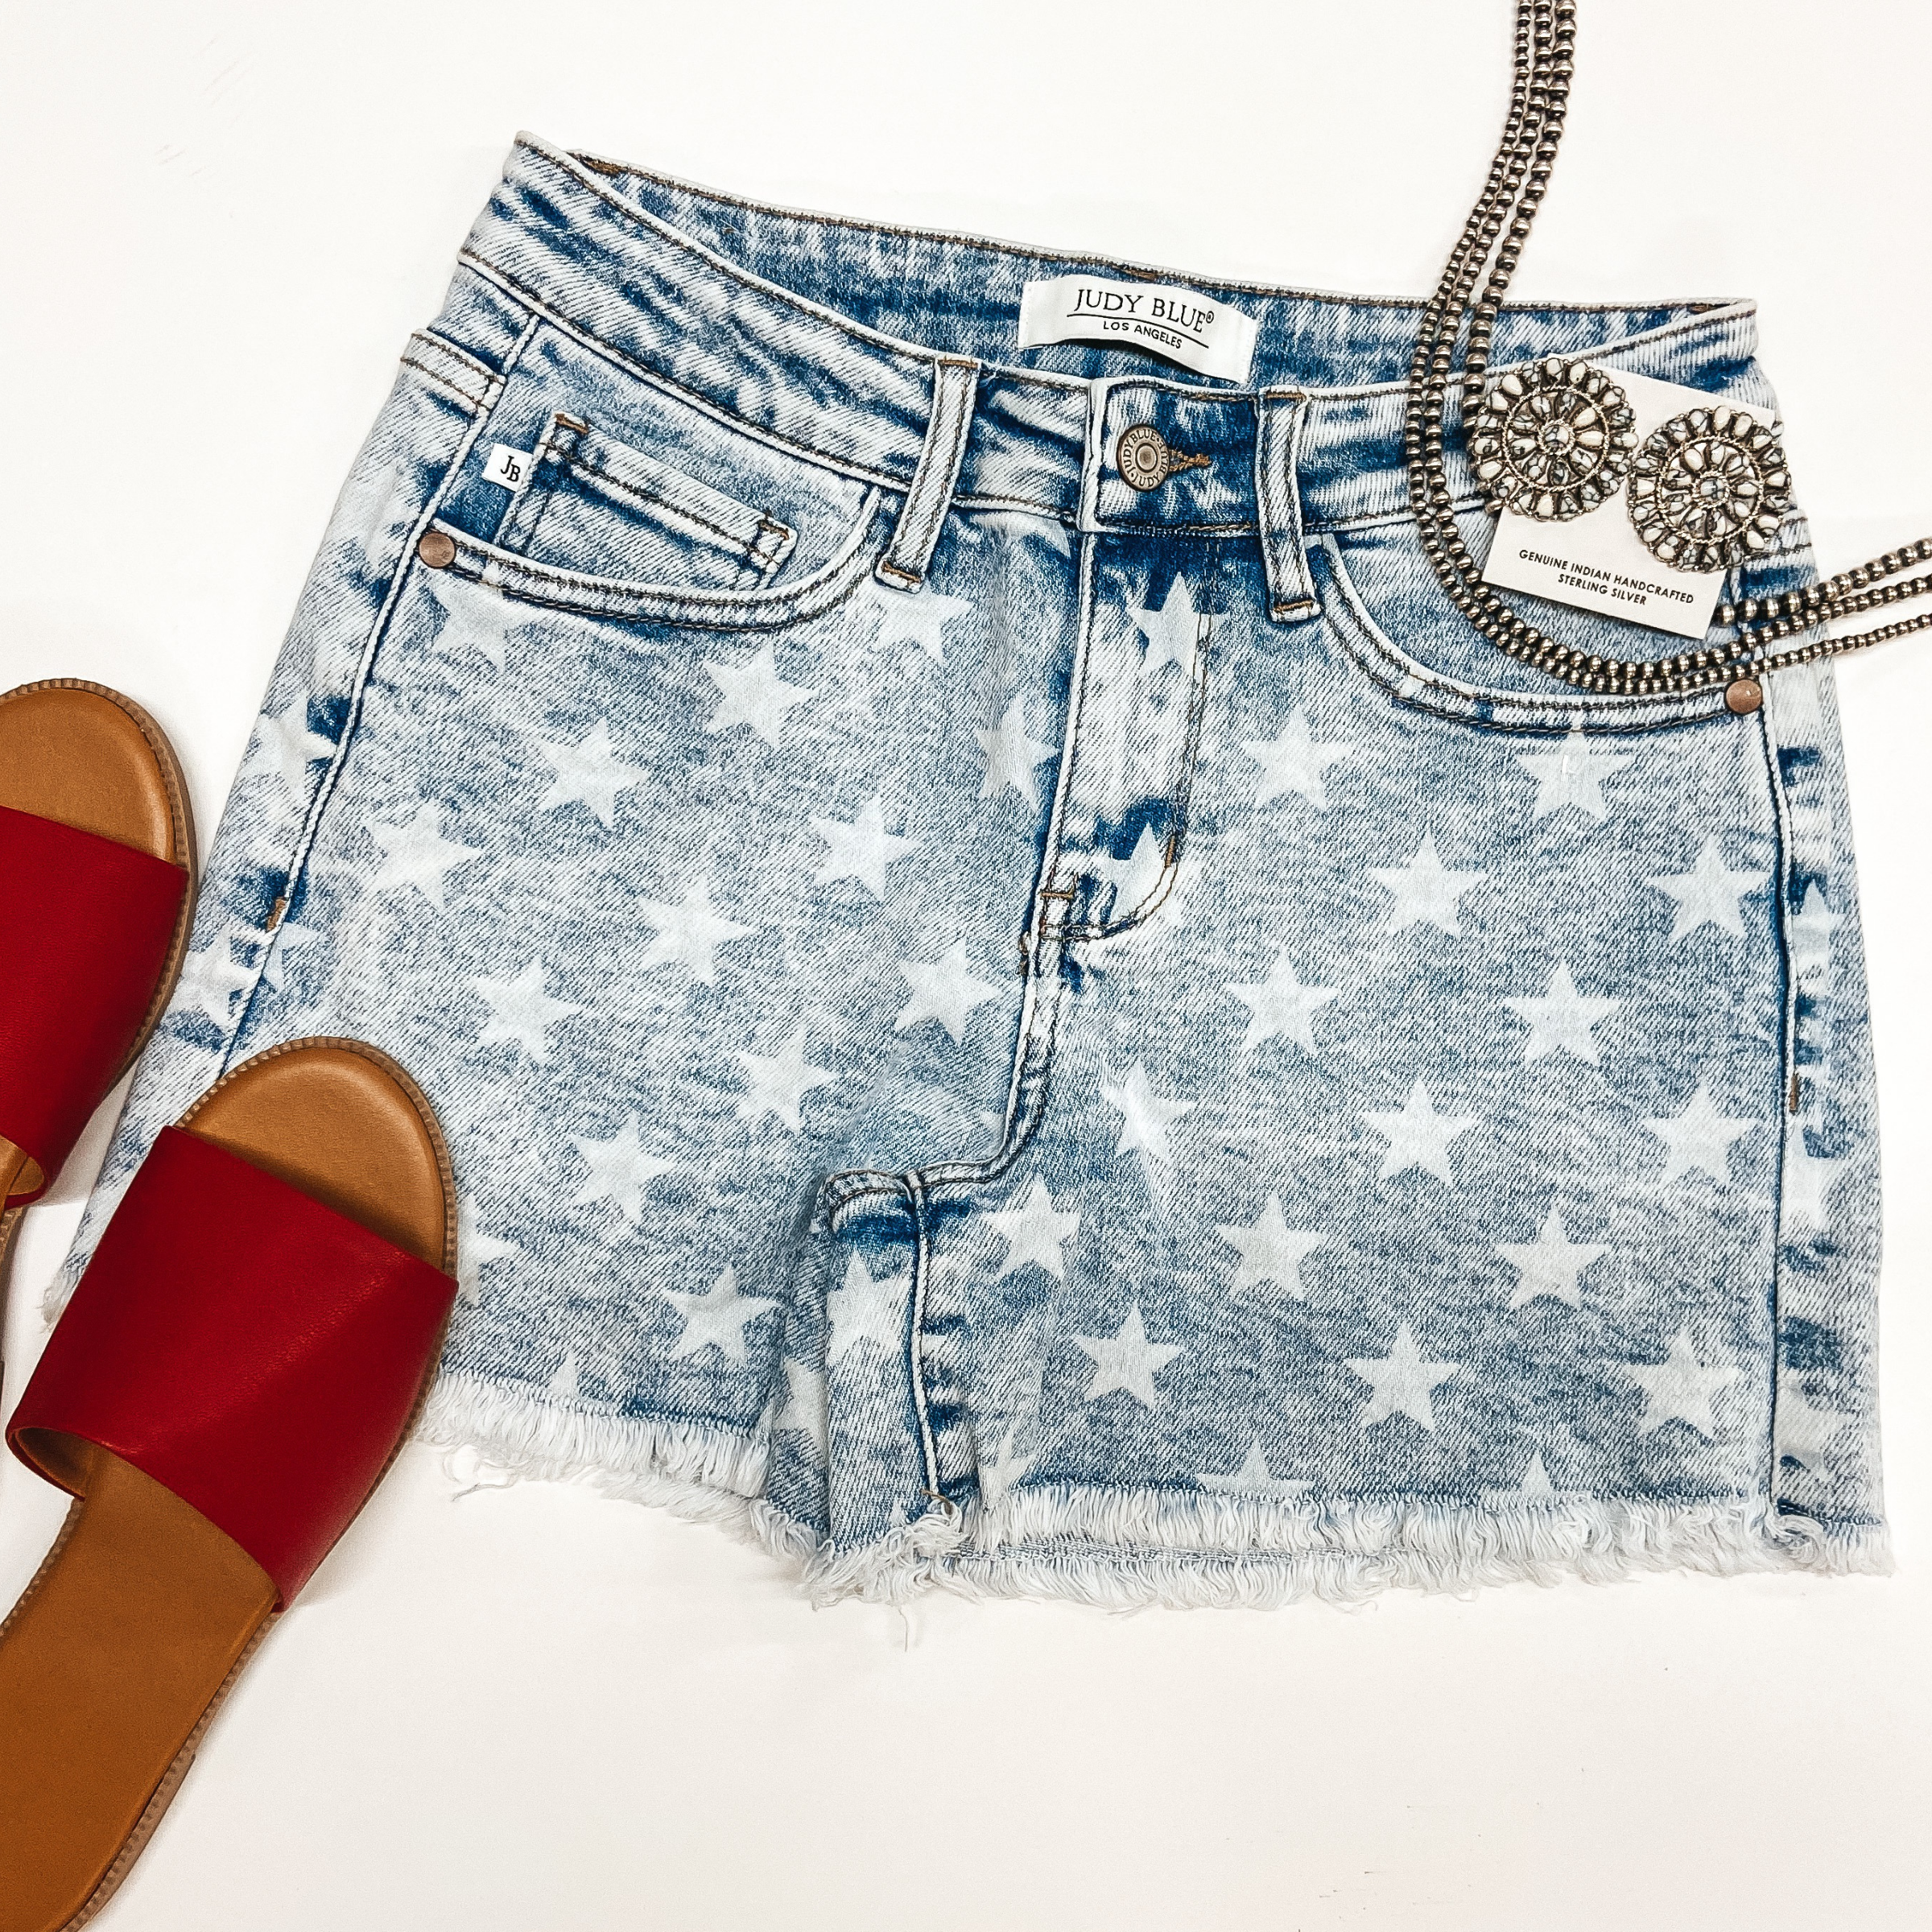 A pair of star print cut off shorts that are light wash. These shorts are pictured on a white background with sterling silver Navajo jewelry.